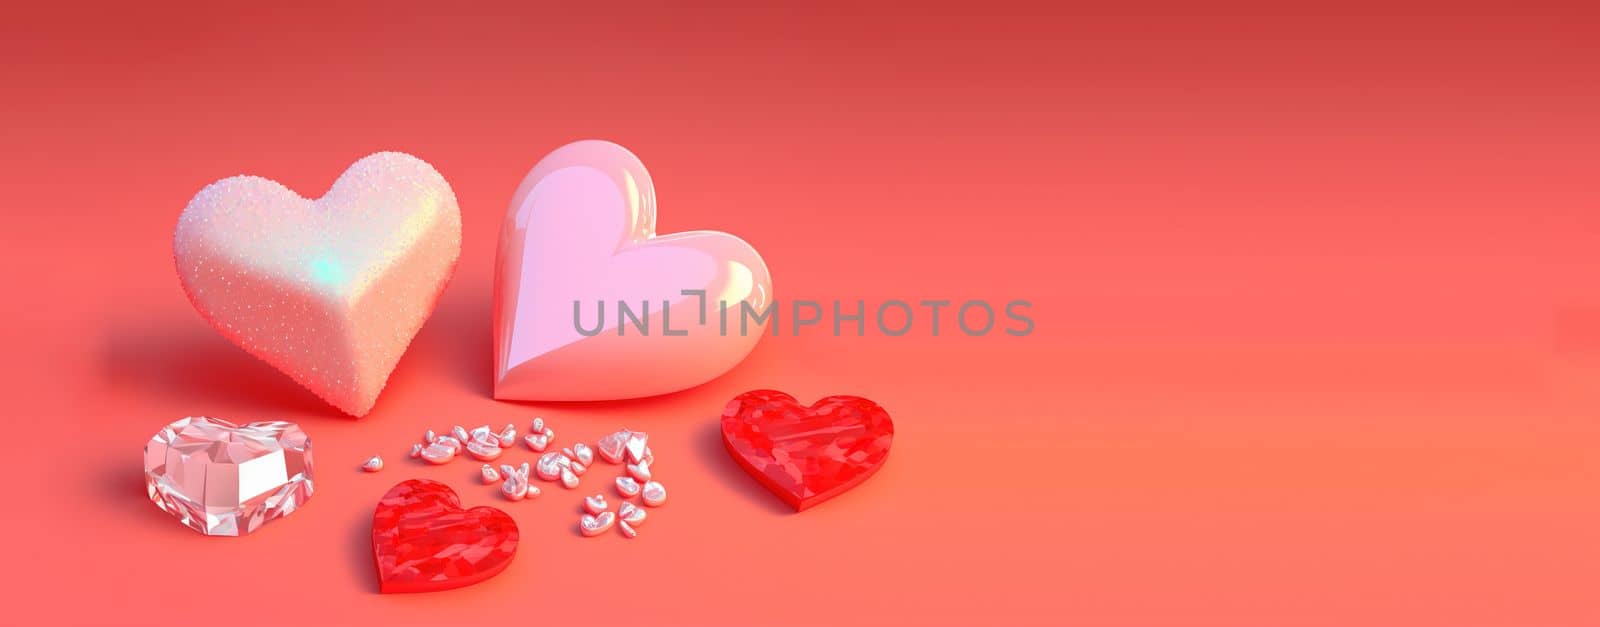 Glittering 3D Heart, Diamond, and Crystal Illustration for Valentine's Day Design Background and Banner by templator